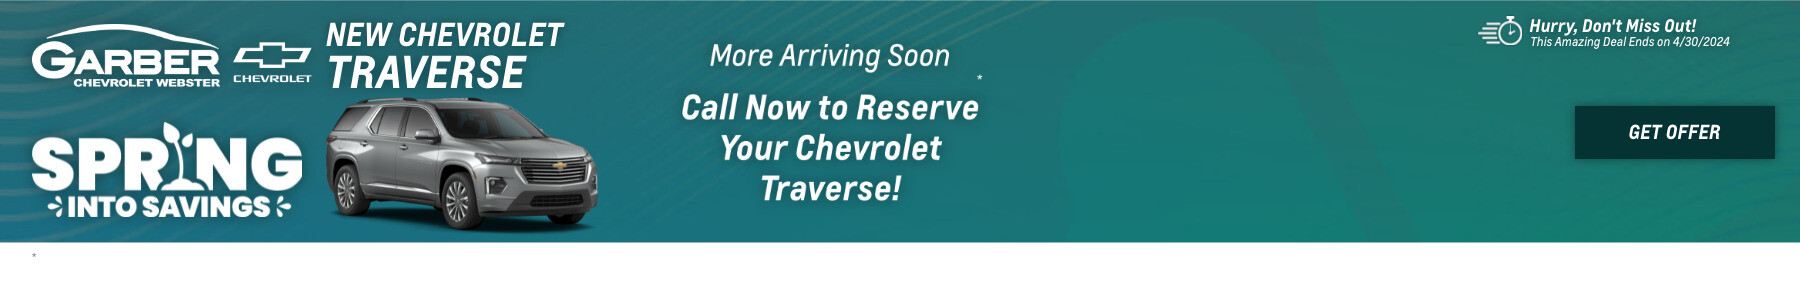 New Chevrolet Traverse Current Deals and Offers in Rochester, NY